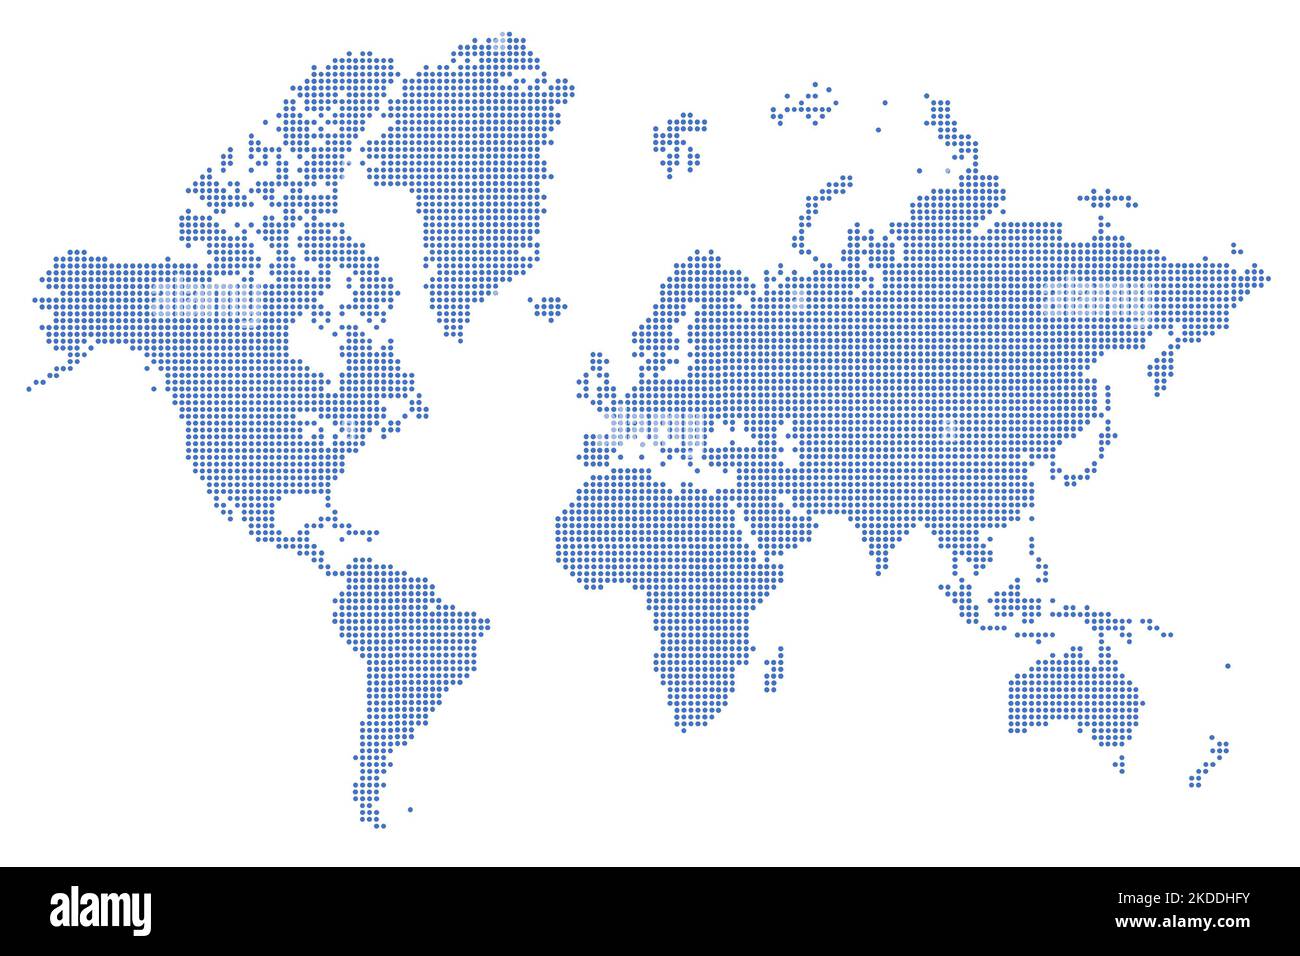 High-resolution map of the world split into individual countries. High-detail world map using dots digital economy infographic Stock Photo